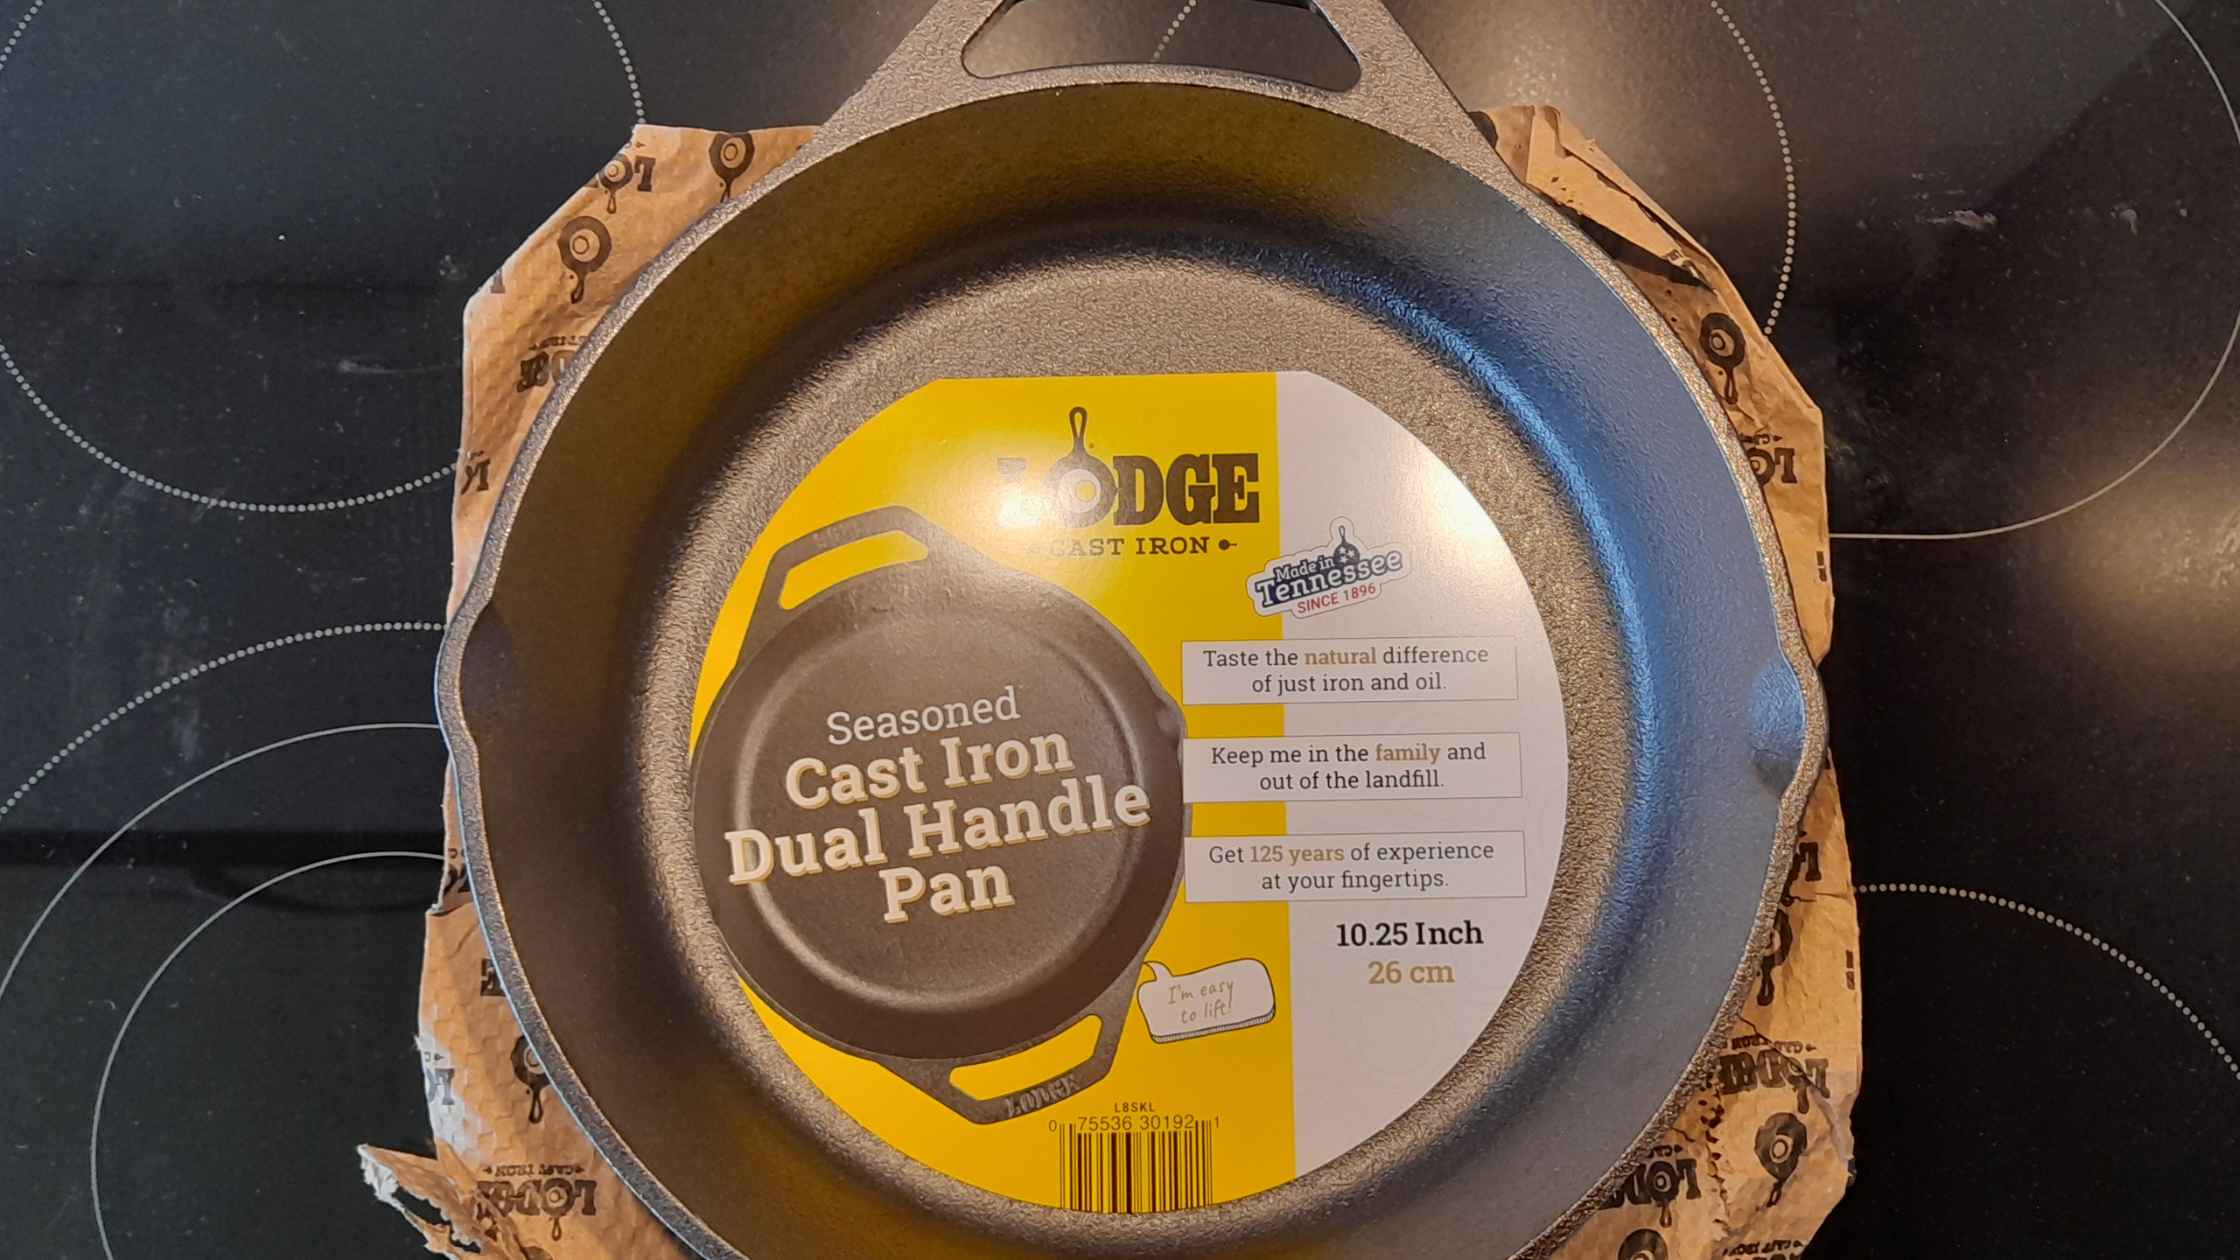 https://barbehow.com/wp-content/uploads/2023/01/Lodge-Cast-Iron-Dual-Handle-Pan-on-delivery.jpg